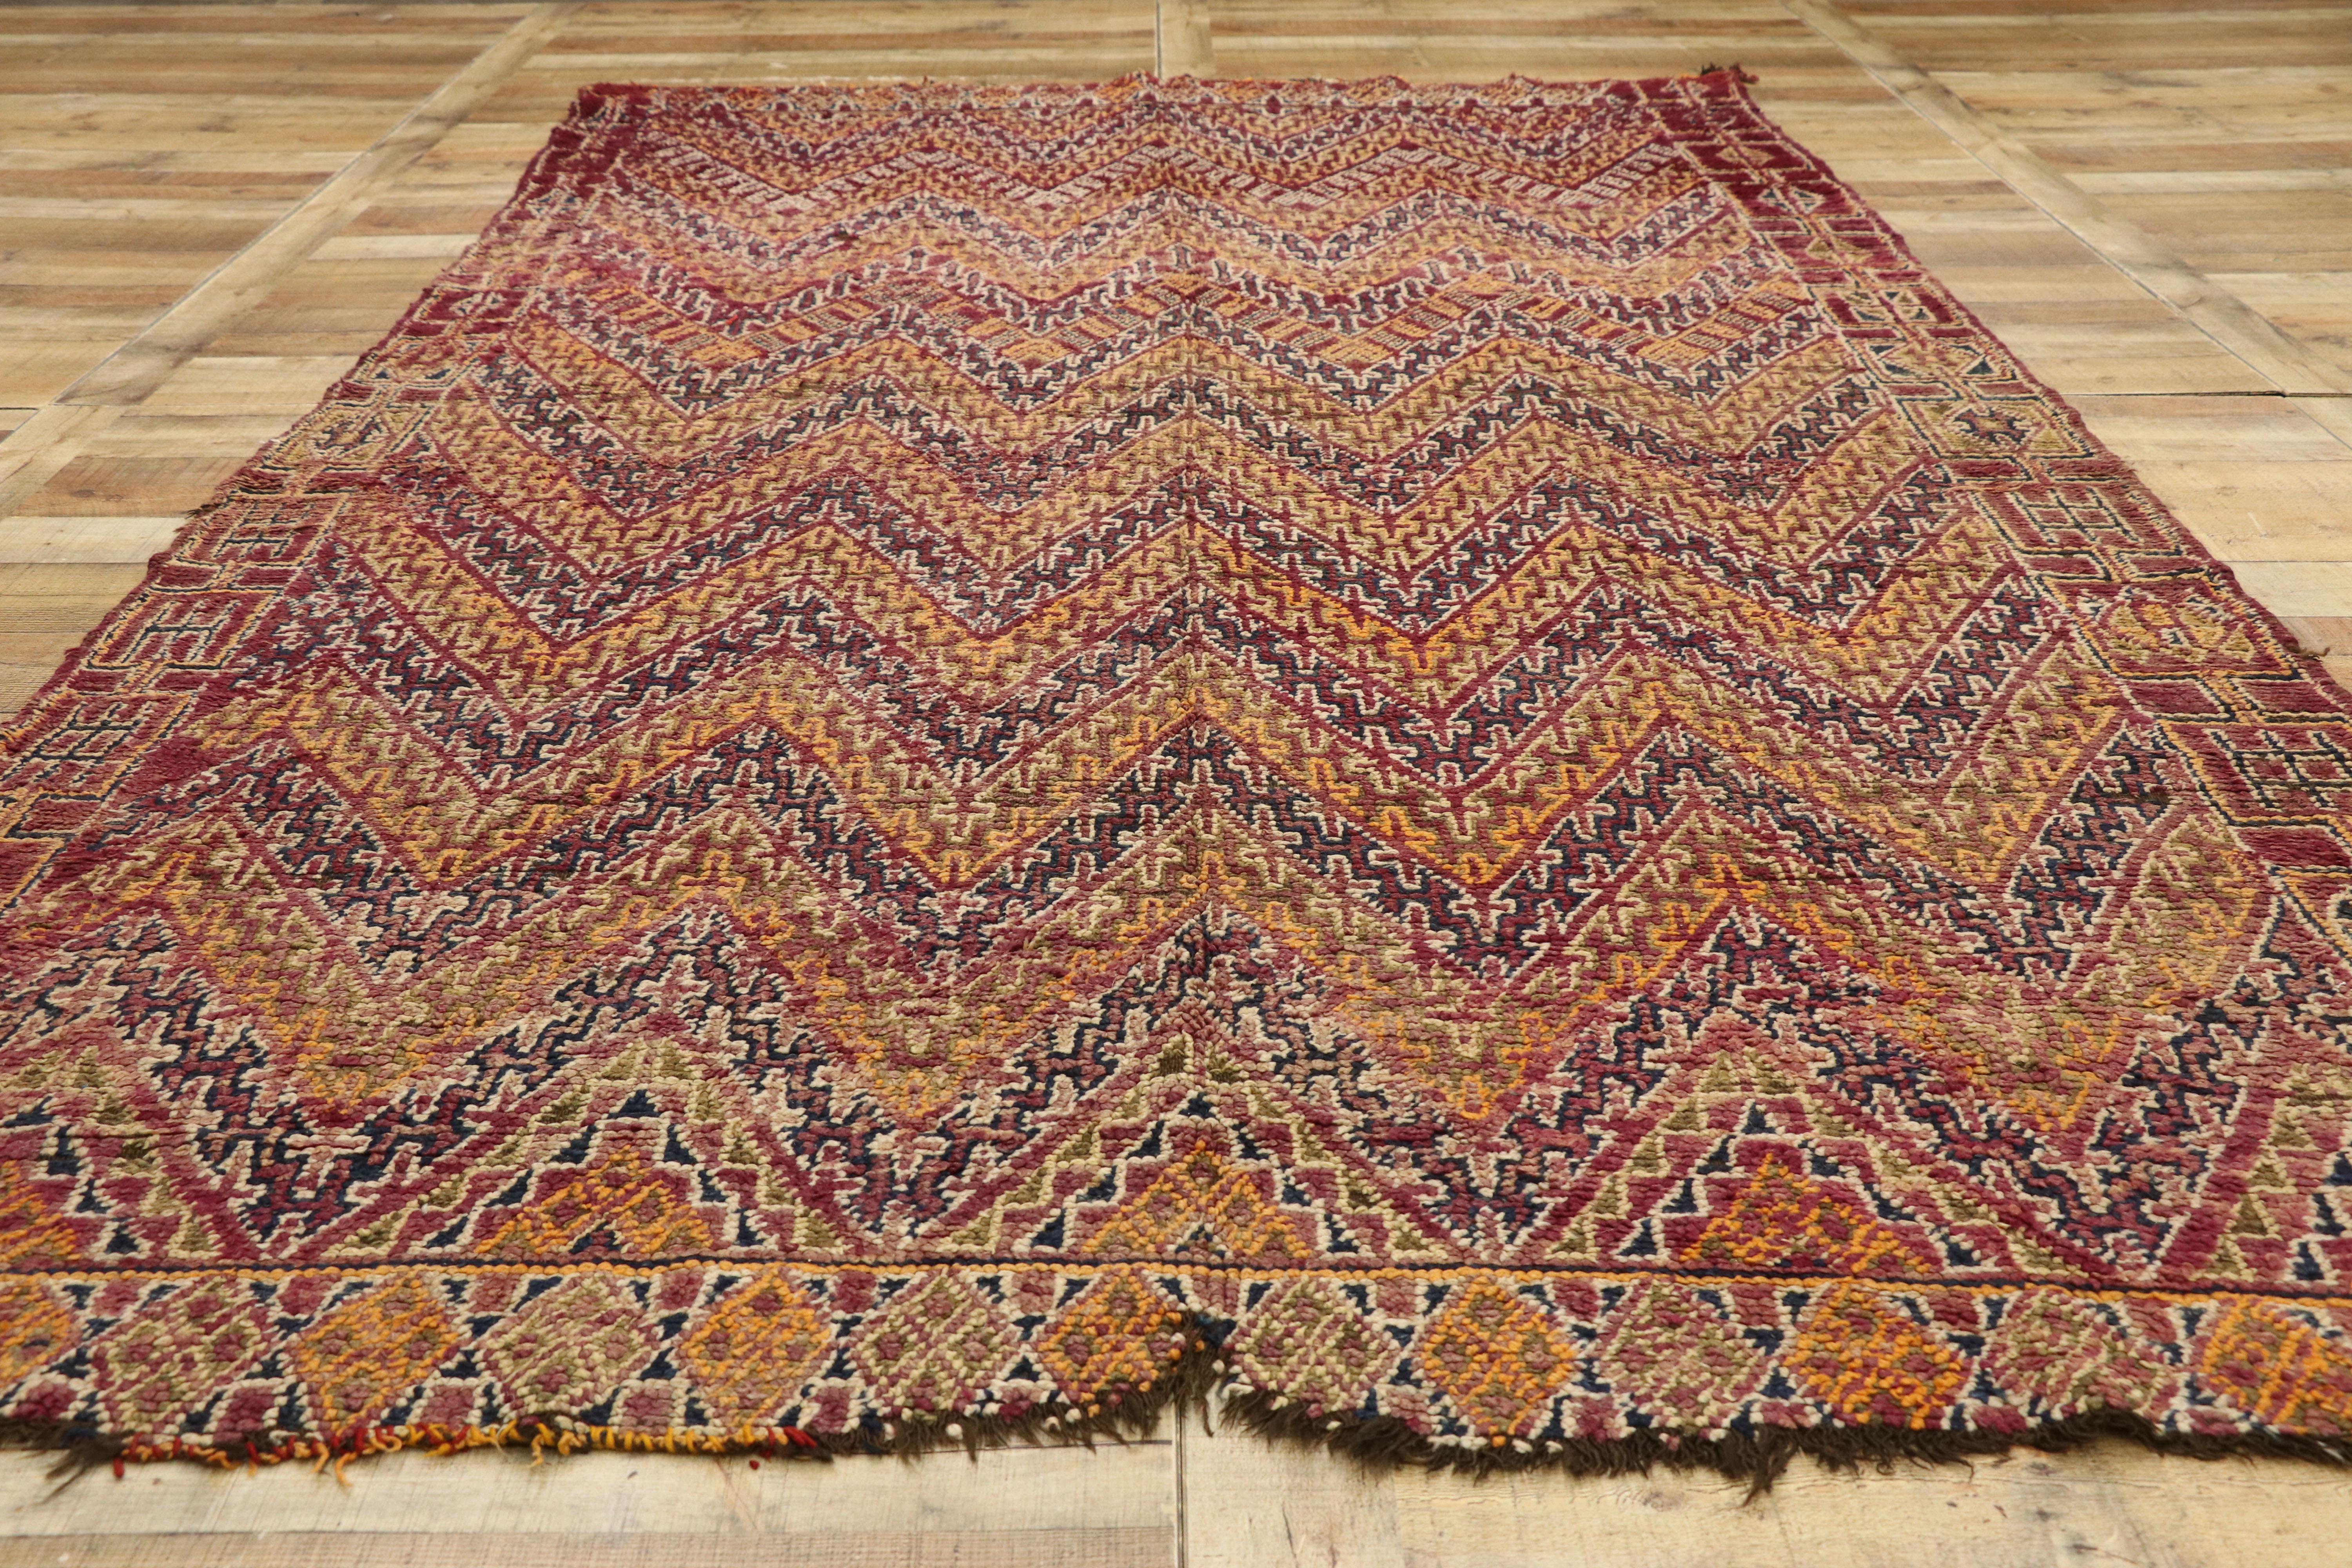 20th Century Vintage Berber Moroccan Zayane Rug with Mid-Century Modern Style